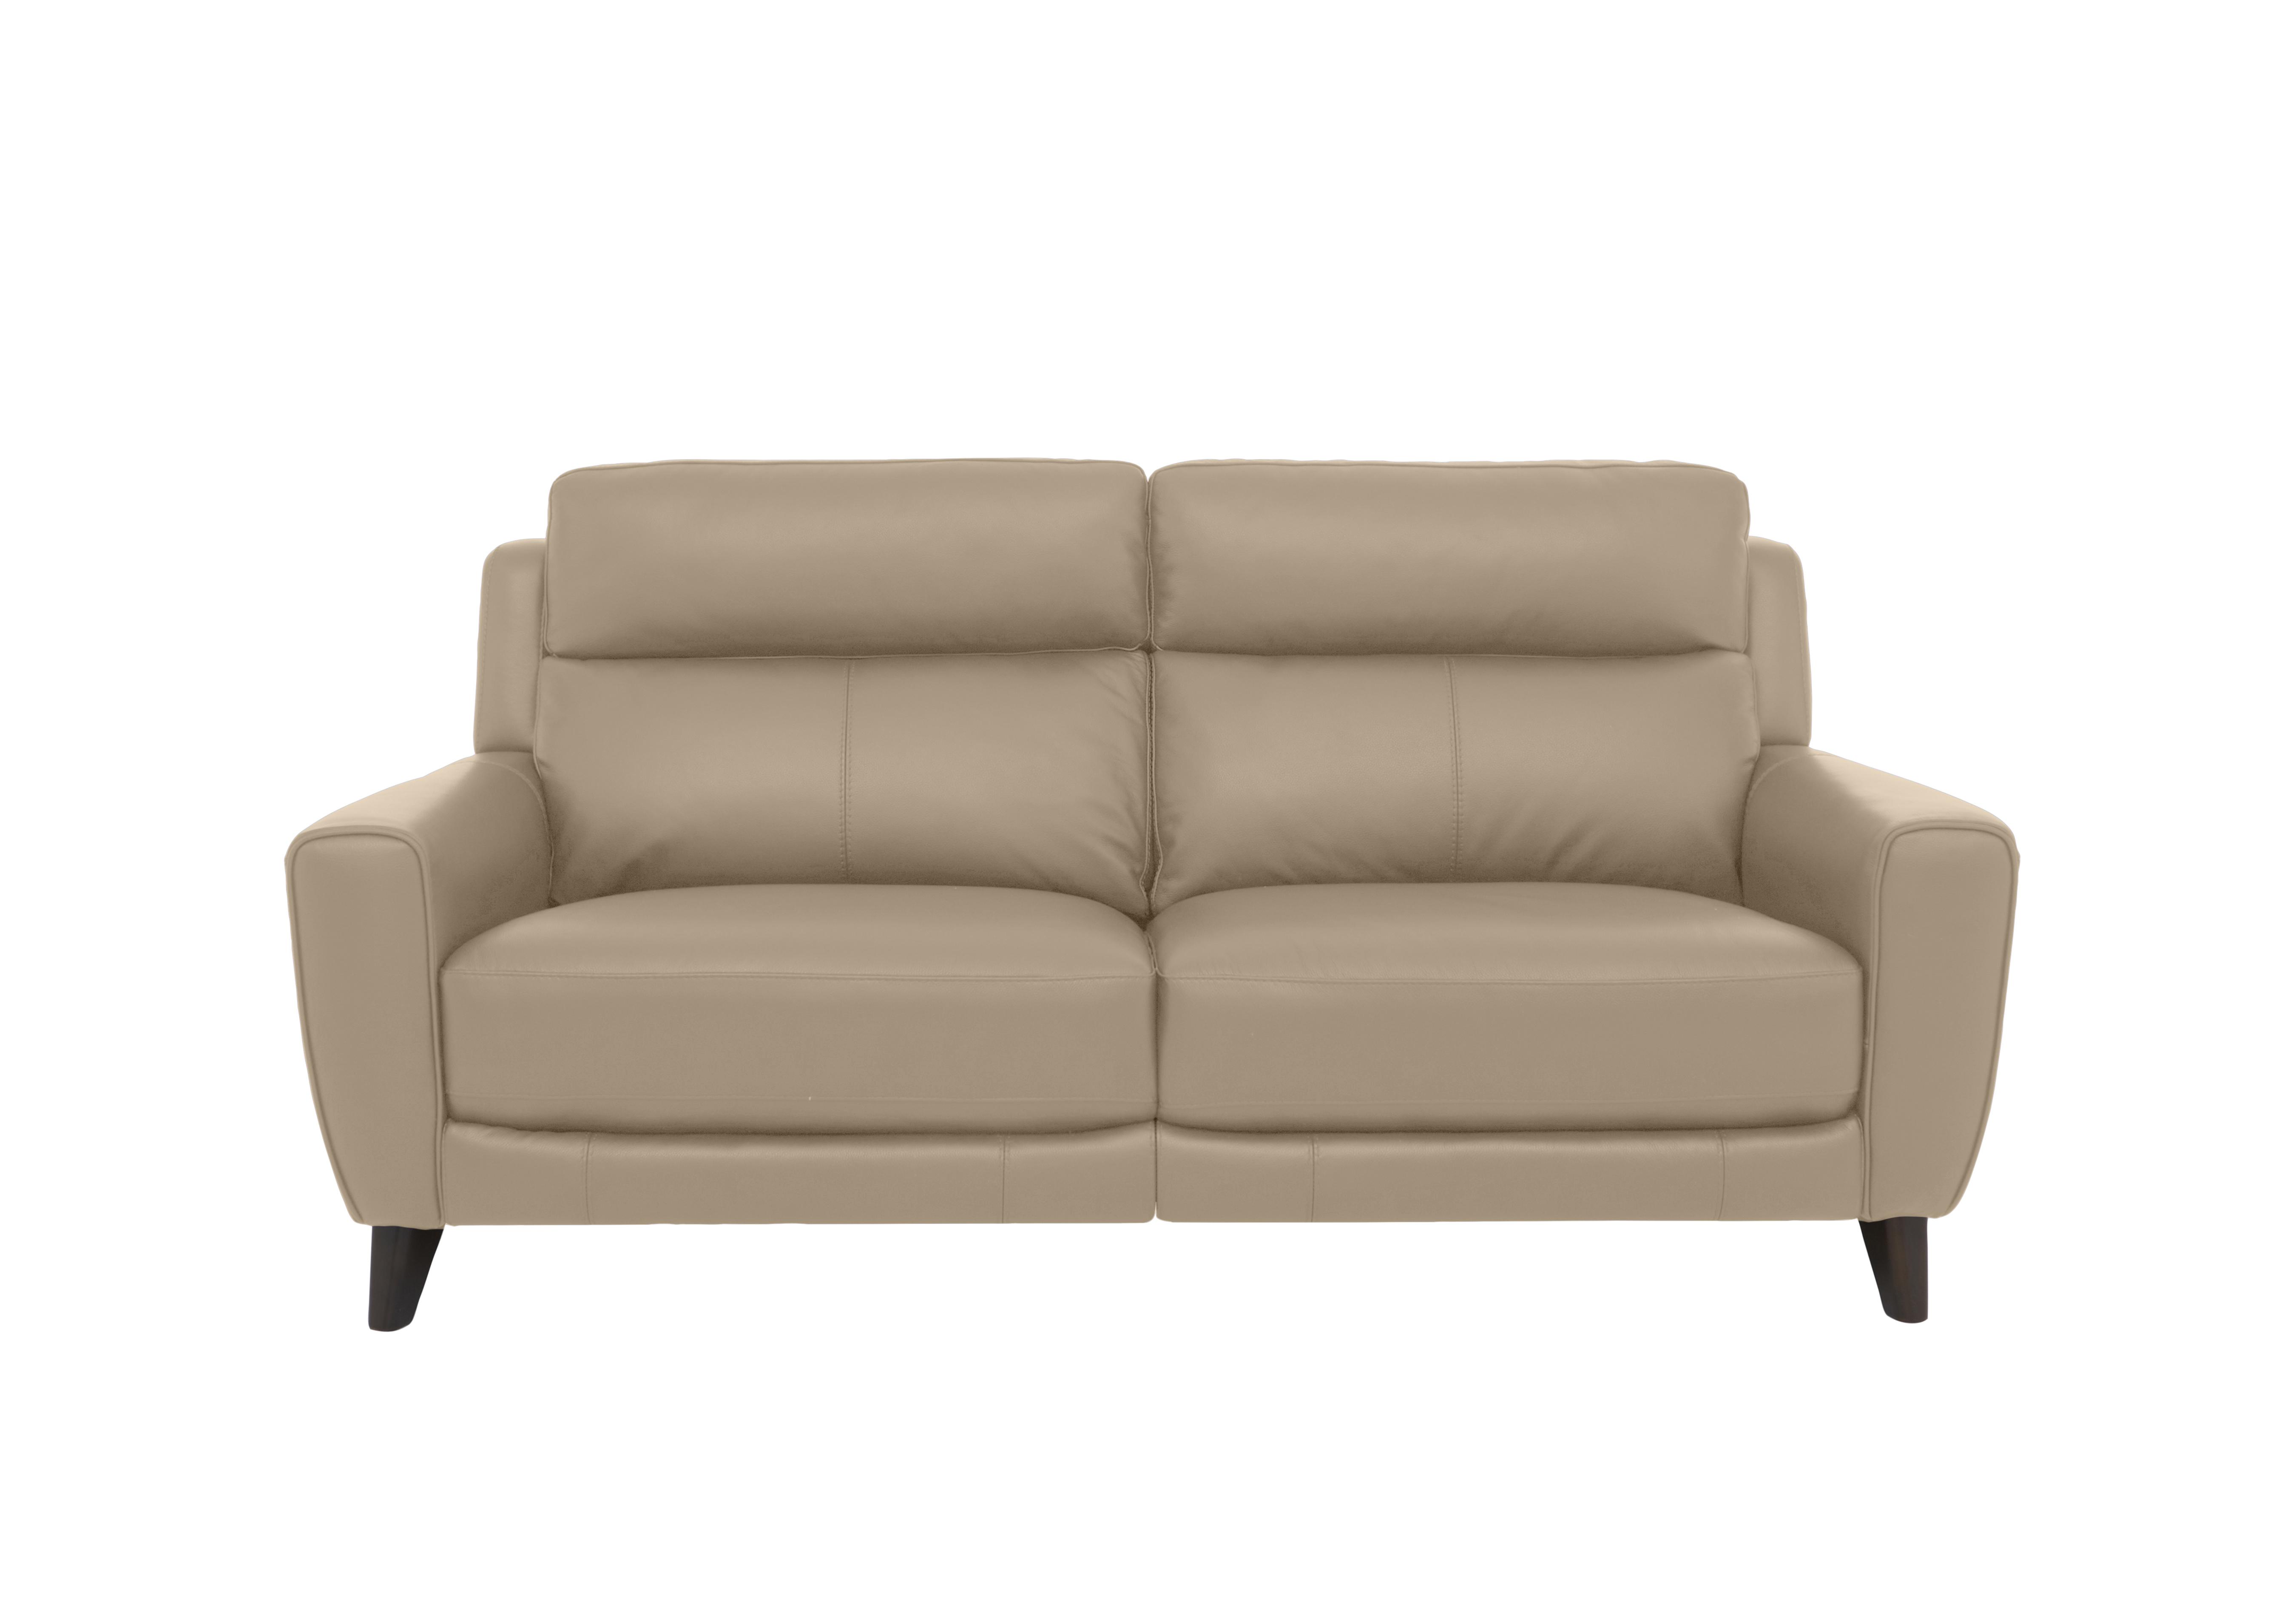 Zen 3 Seater Leather Power Recliner Sofa with Power Headrests and Power Lumbar in Bx-039c Pebble on Furniture Village